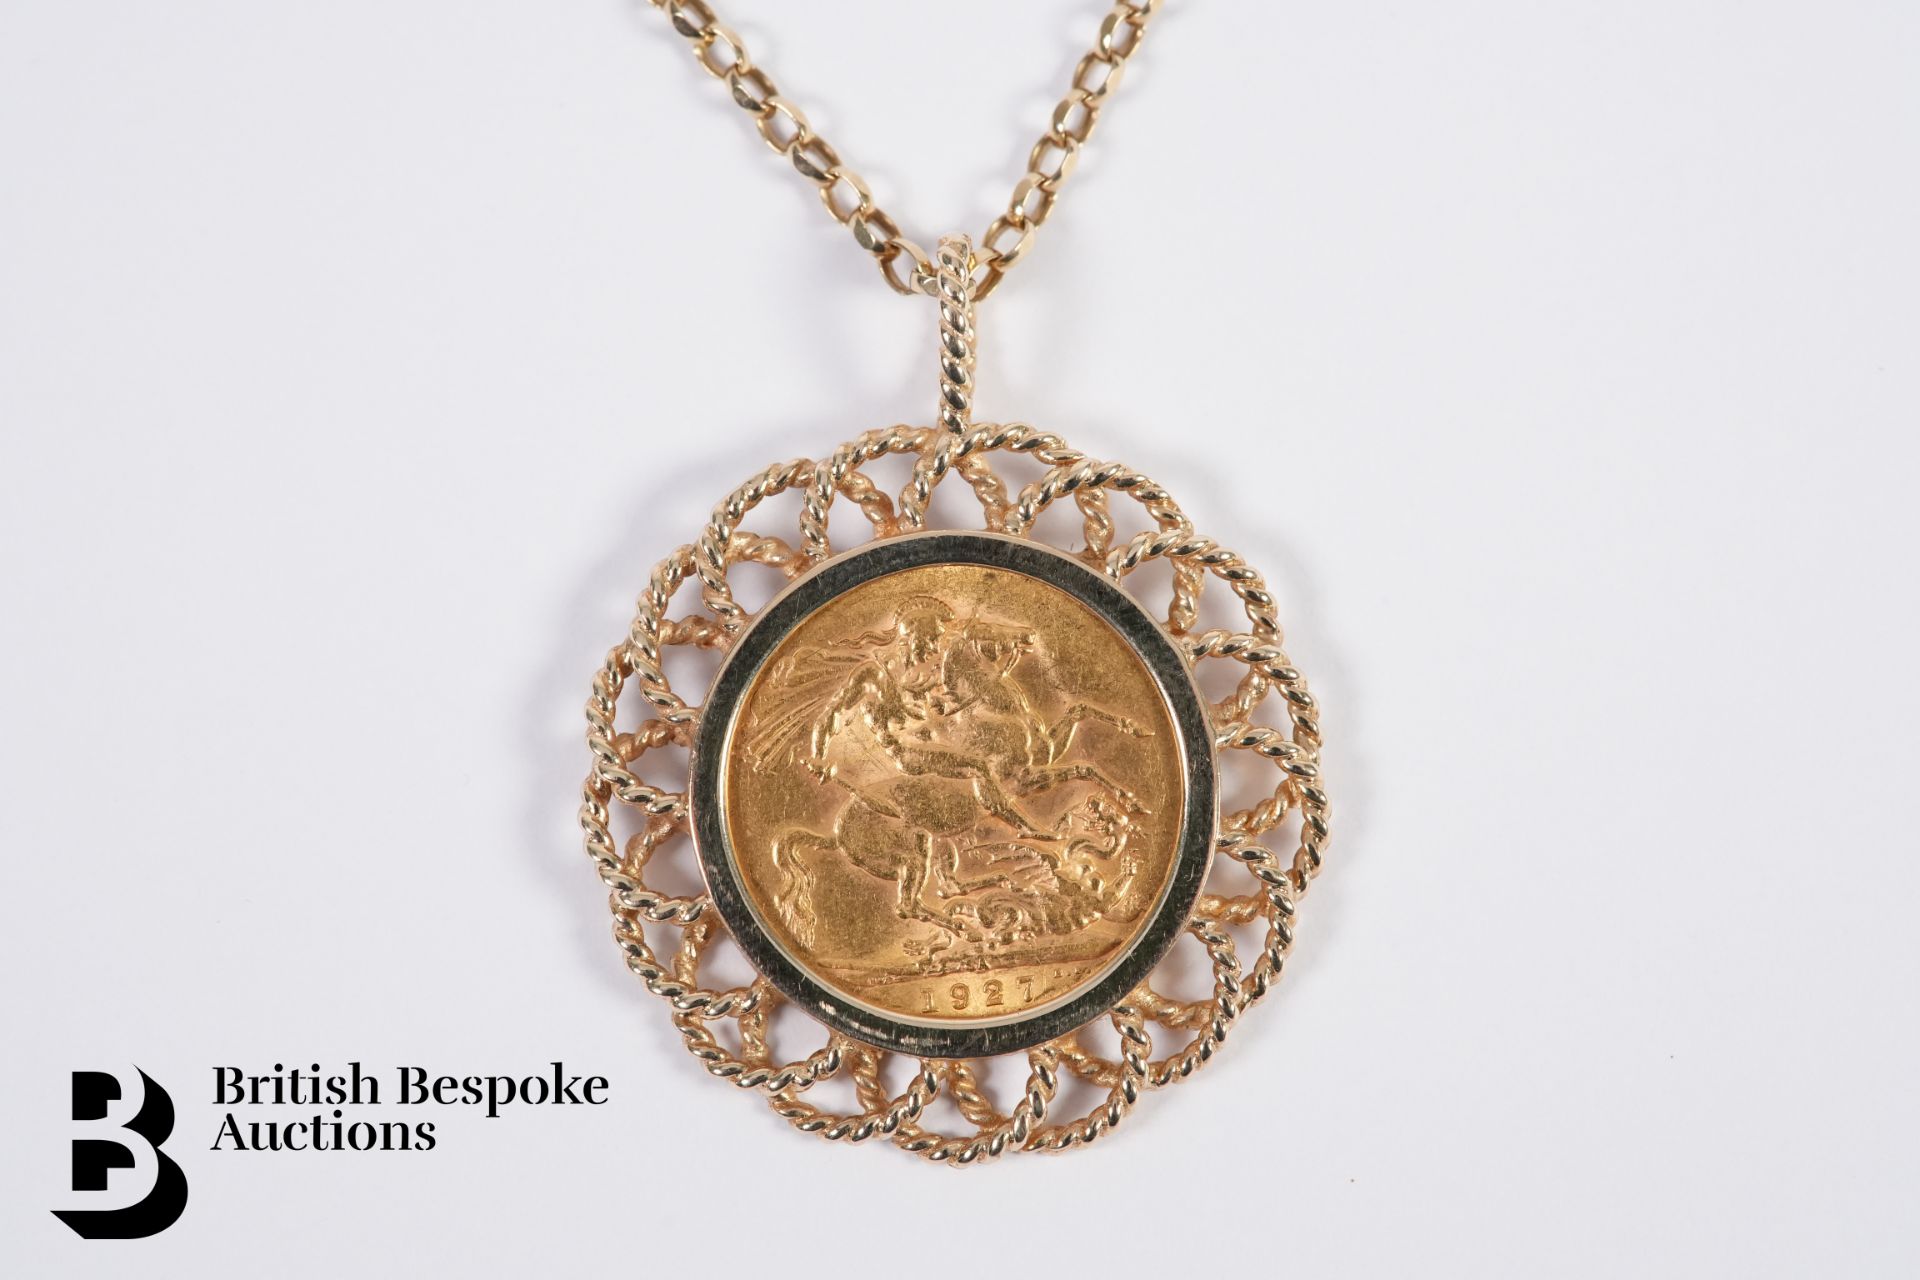 Gold Sovereign Pendant on Chain - Image 2 of 3